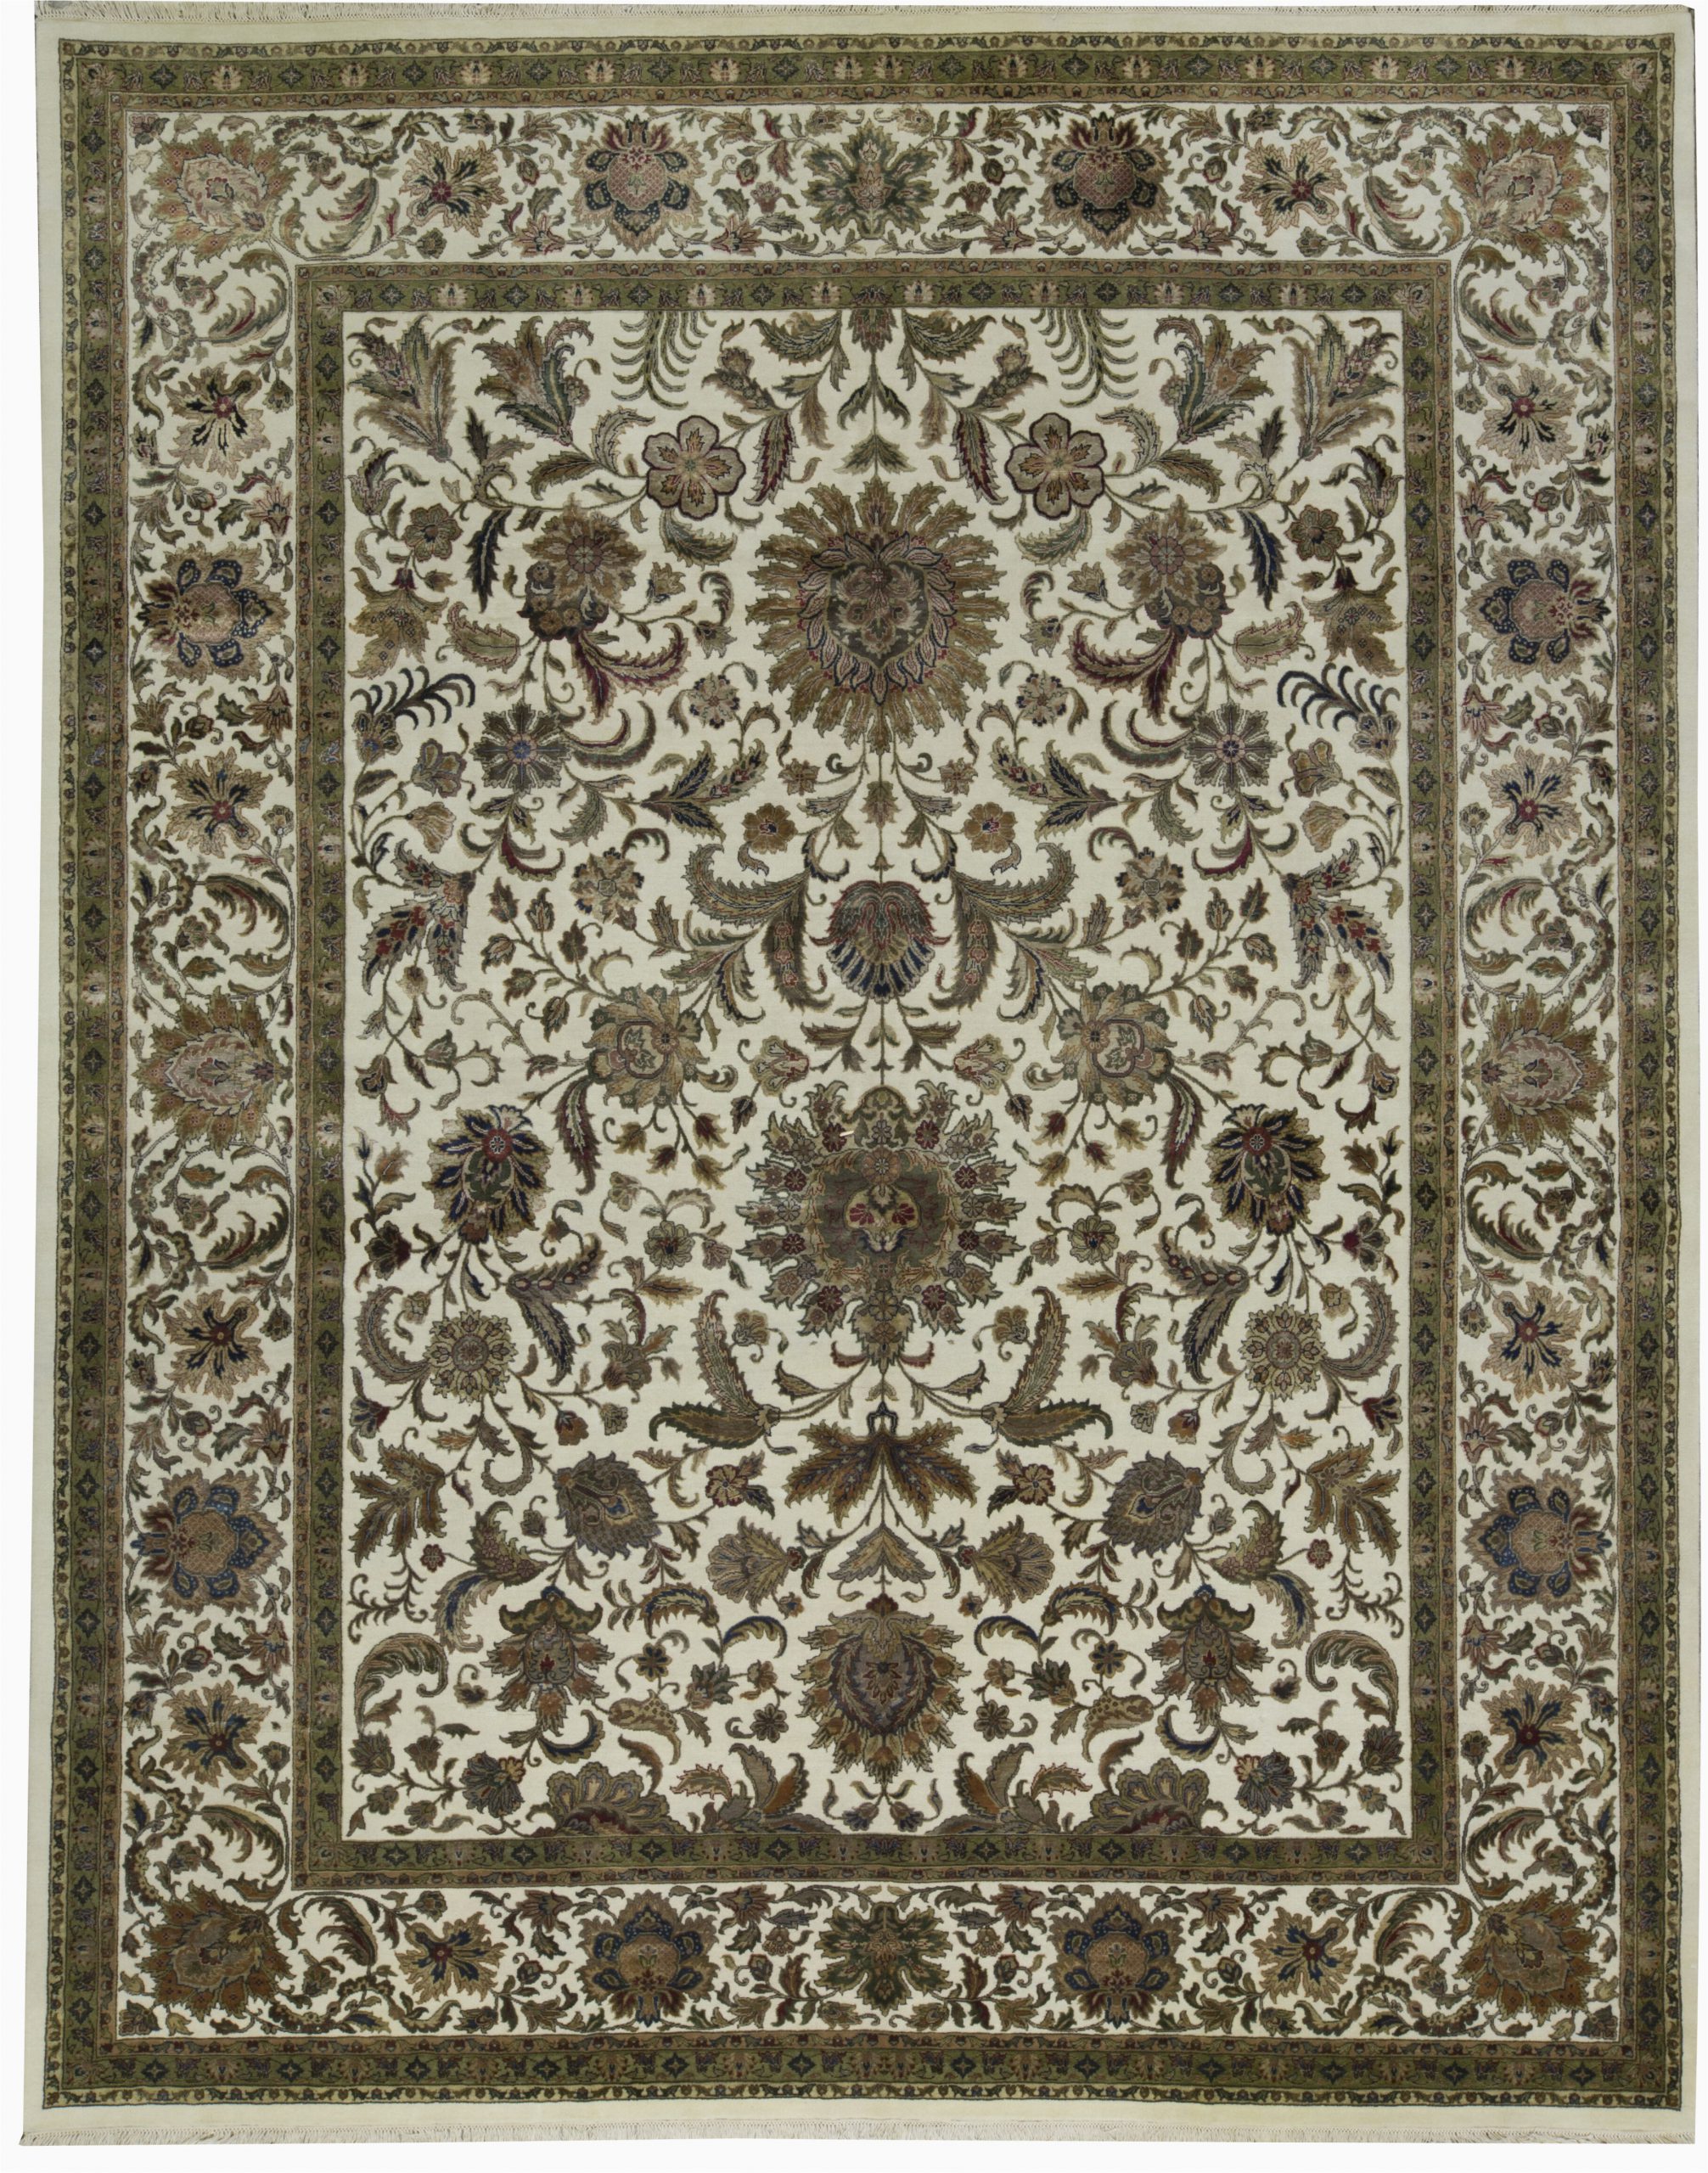 60 X 80 area Rug E Of A Kind Chantel Hand Knotted Beige Brown 12 X 15 area Rug